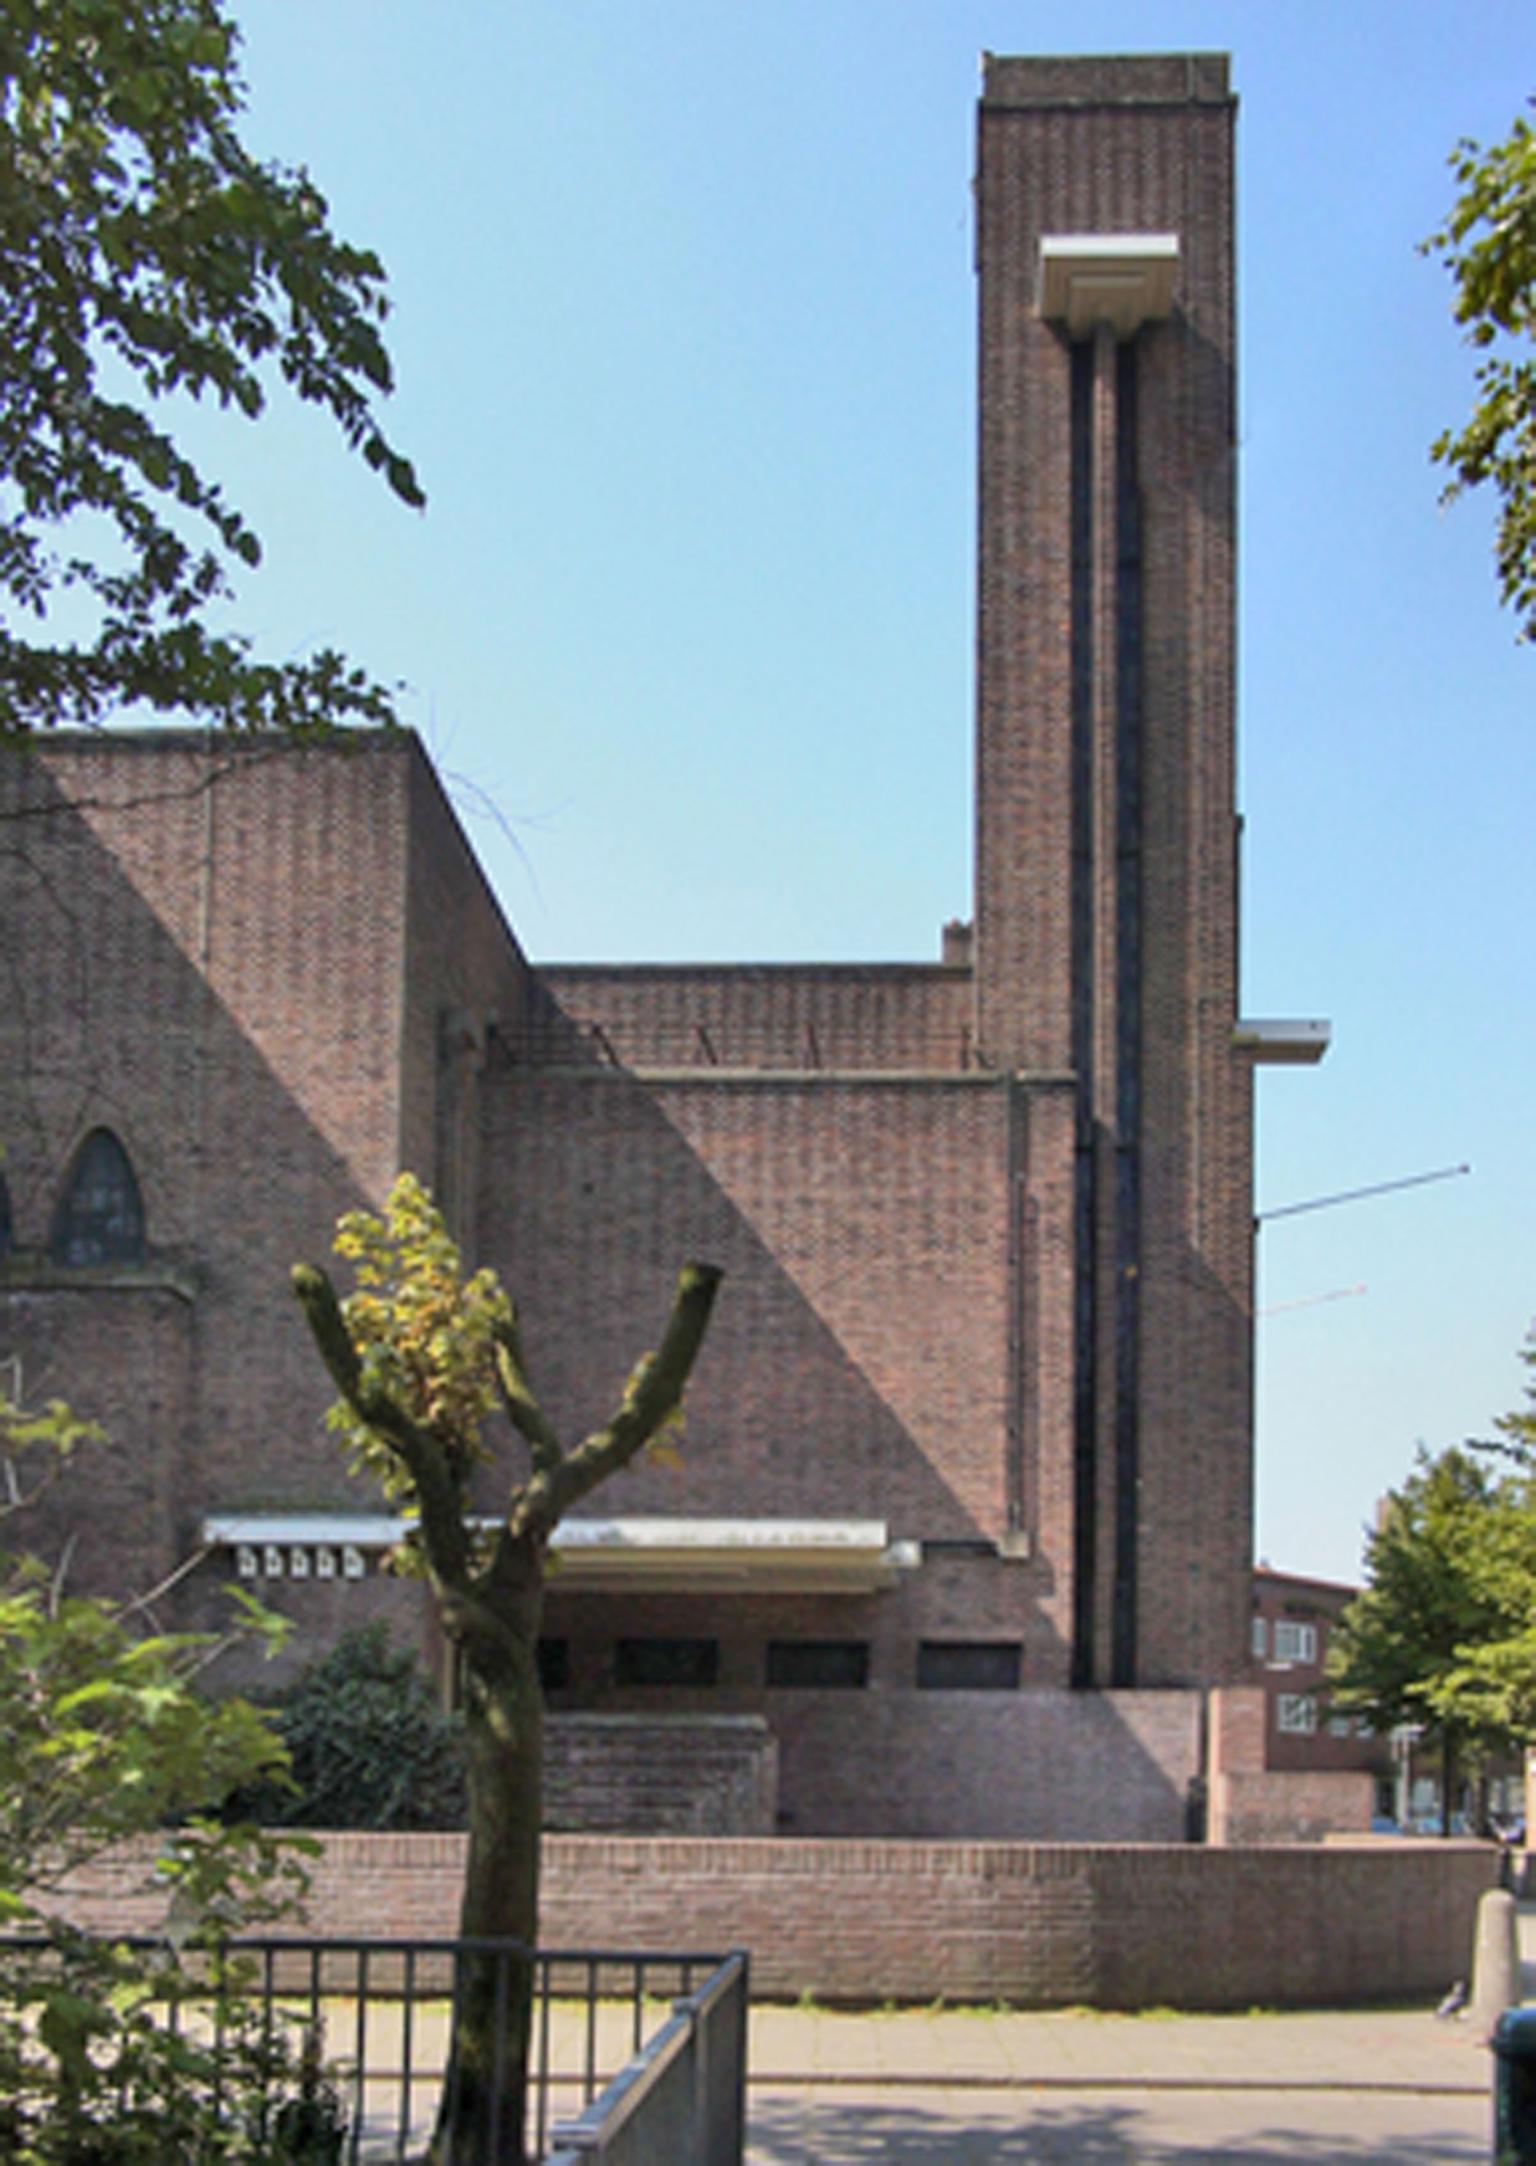 Photograph of brick facade and block shaped tower of building.